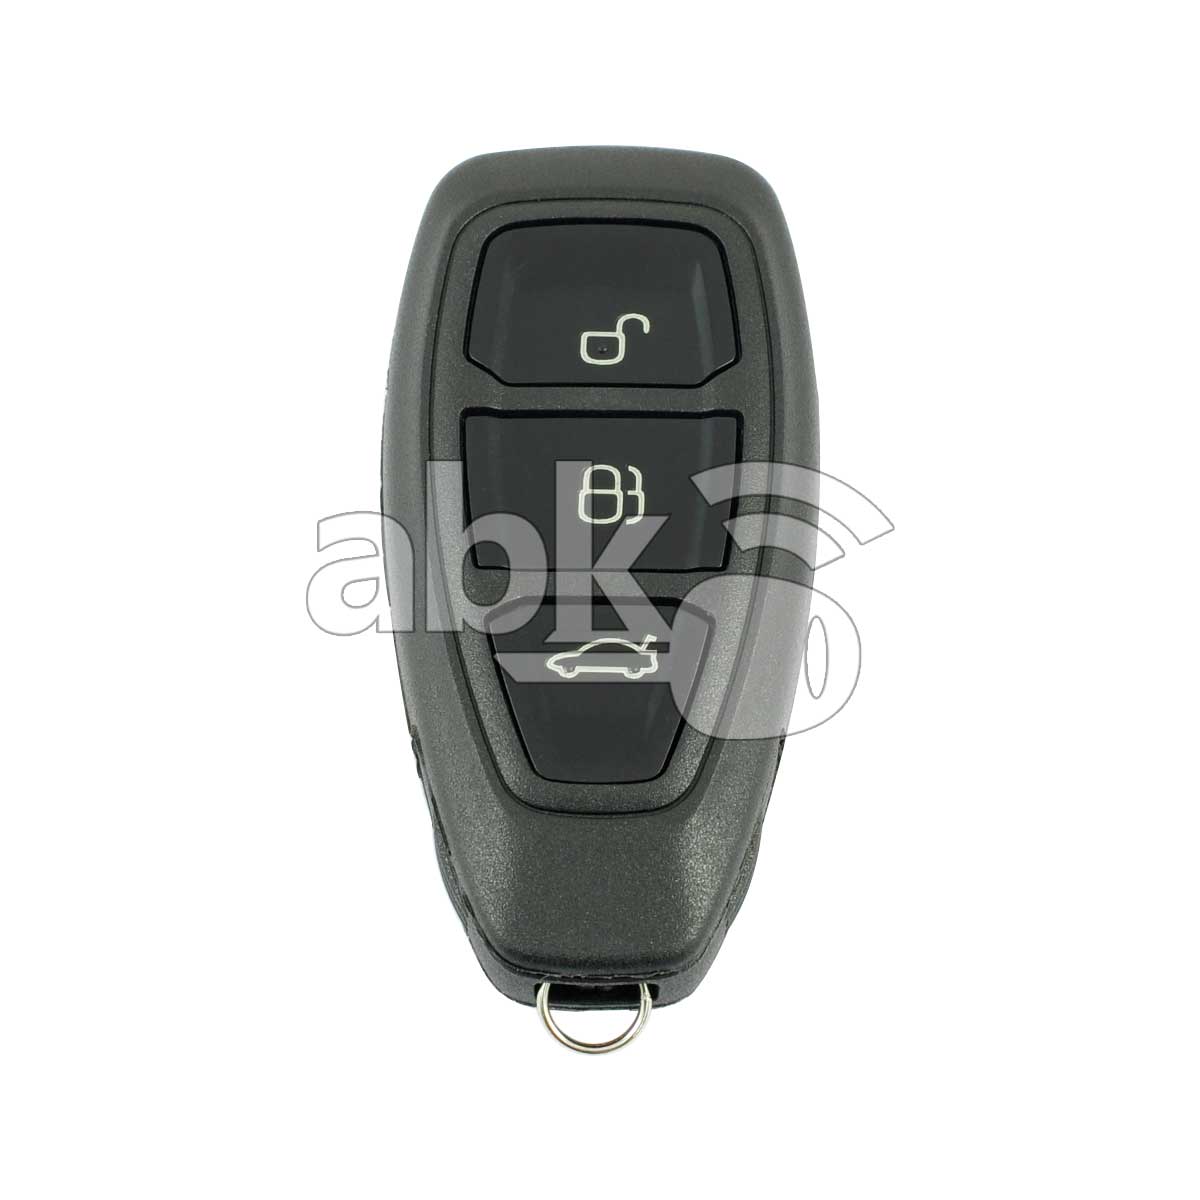 Ford Focus C-Max 2015+ Smart Key 3Buttons KR5876268 433MHz 2178773 1925235 2027592 - ABK-2401 - 